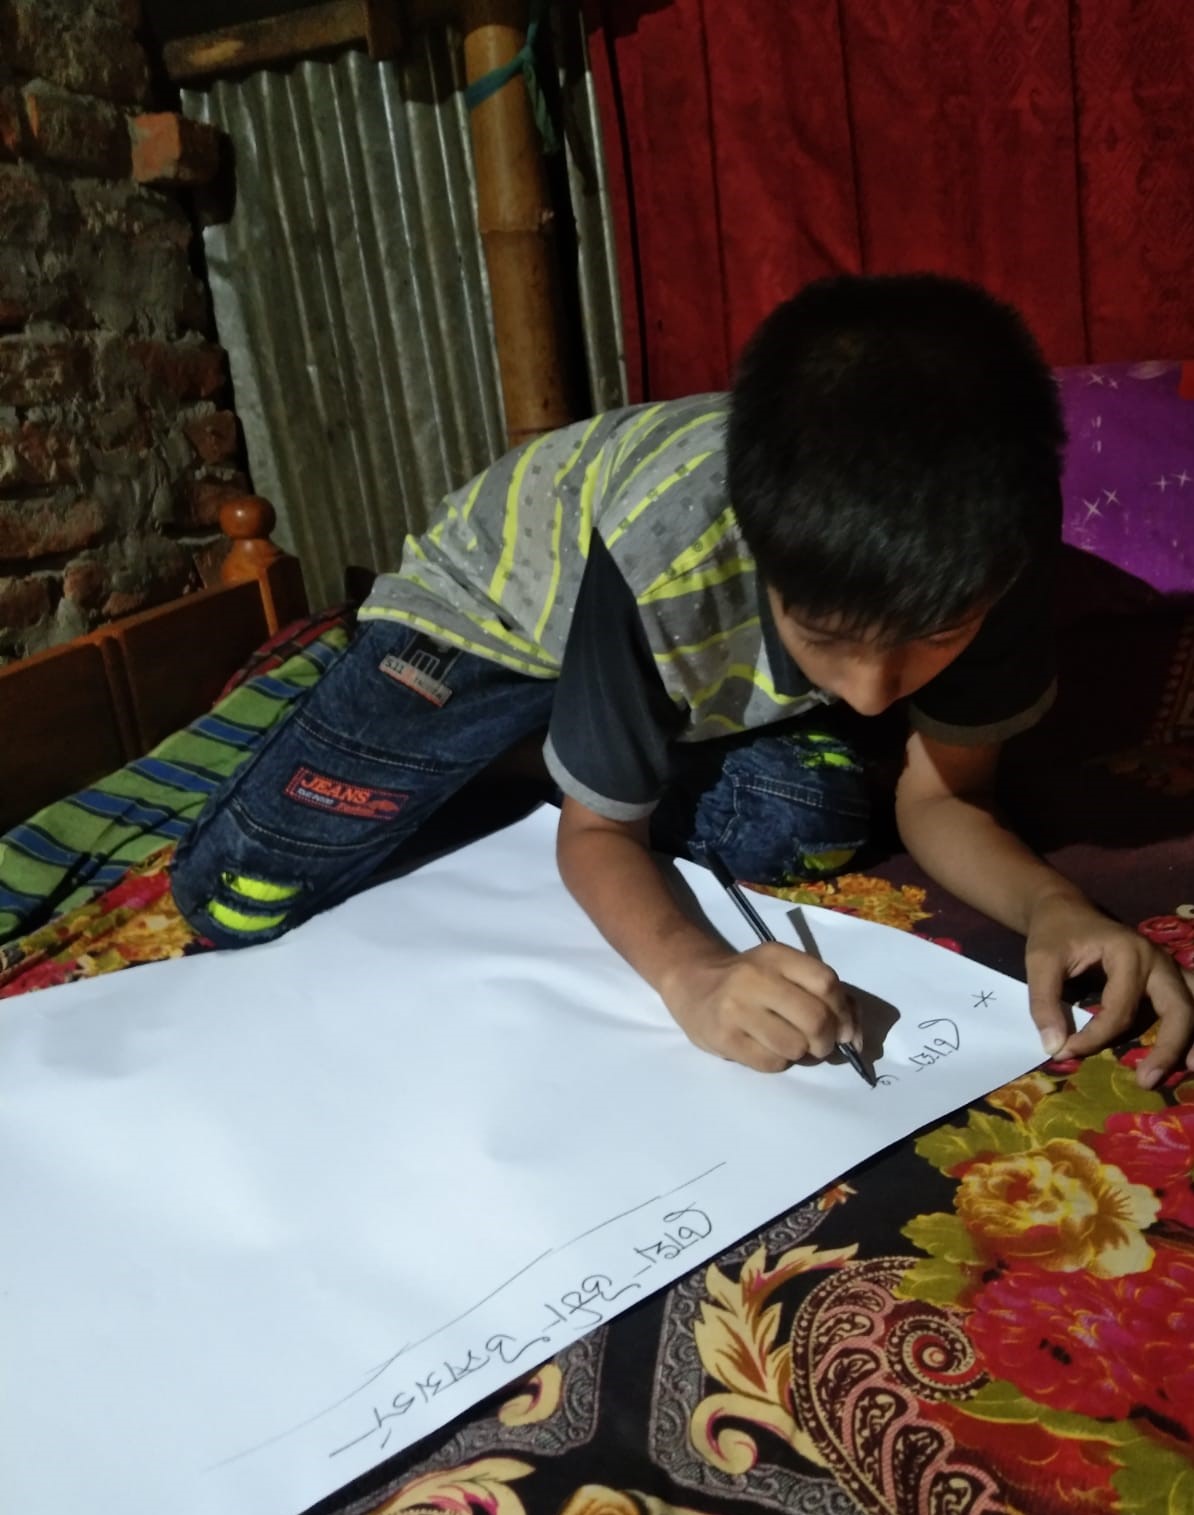 Arman making a poster on conjunctivitis awareness